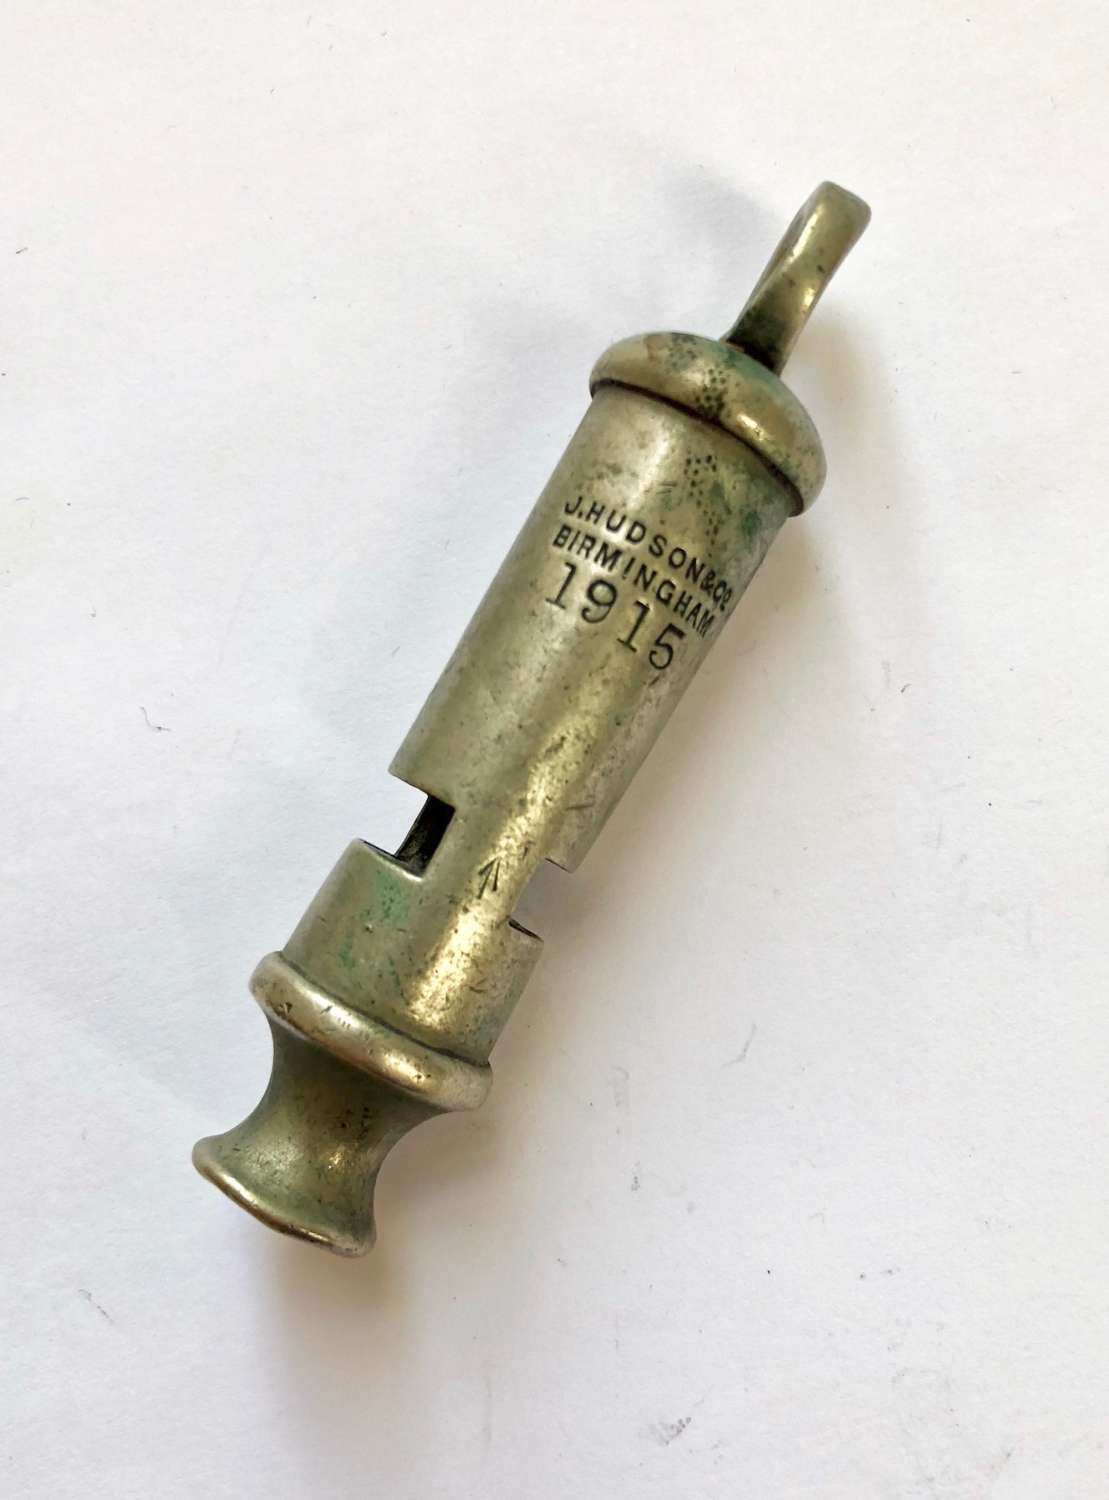 WW1 British Army 1915 Trench Whistle.